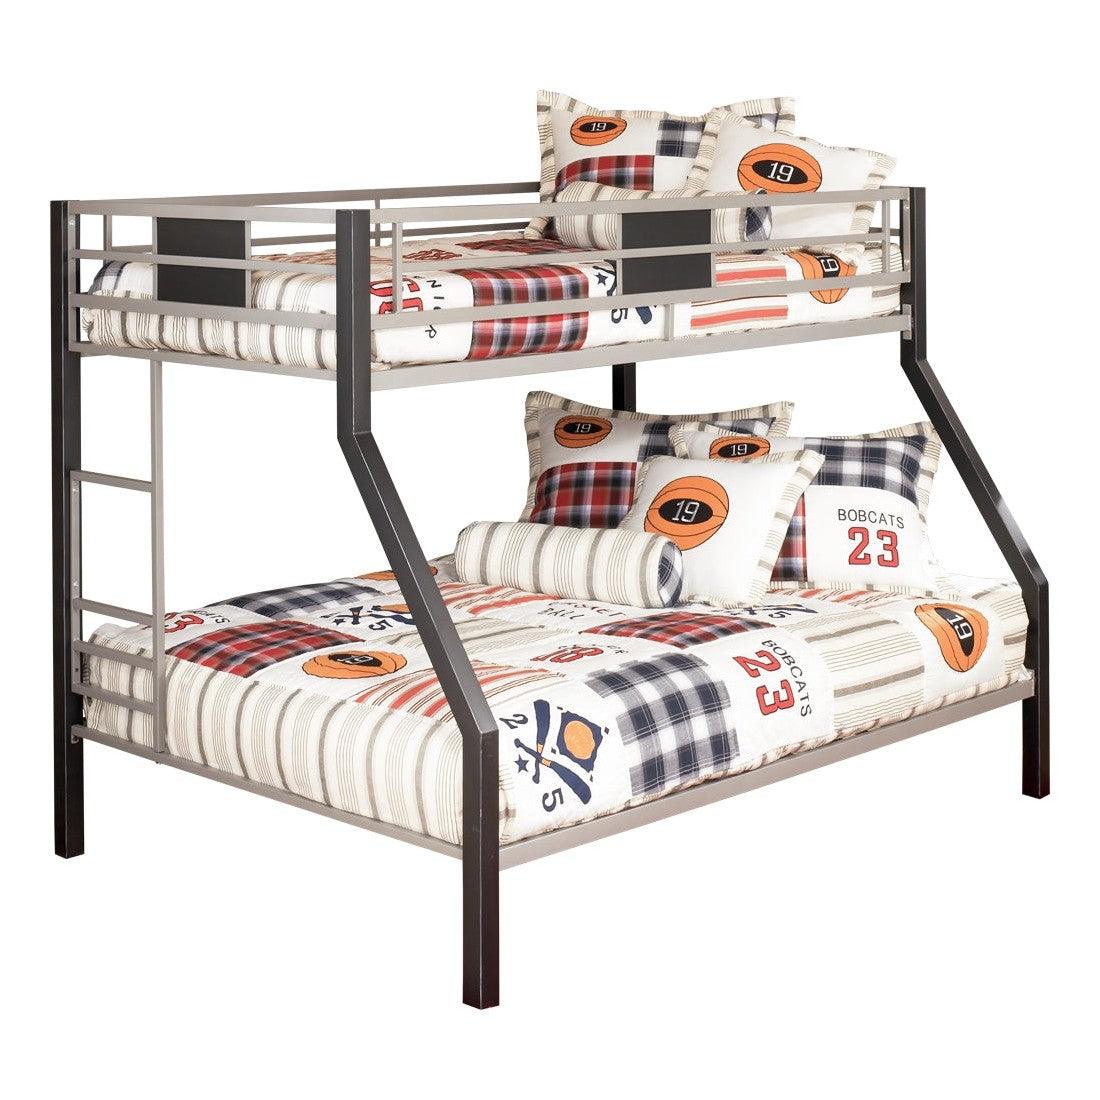 Dinsmore Twin over Full Bunk Bed Ash-B106-56